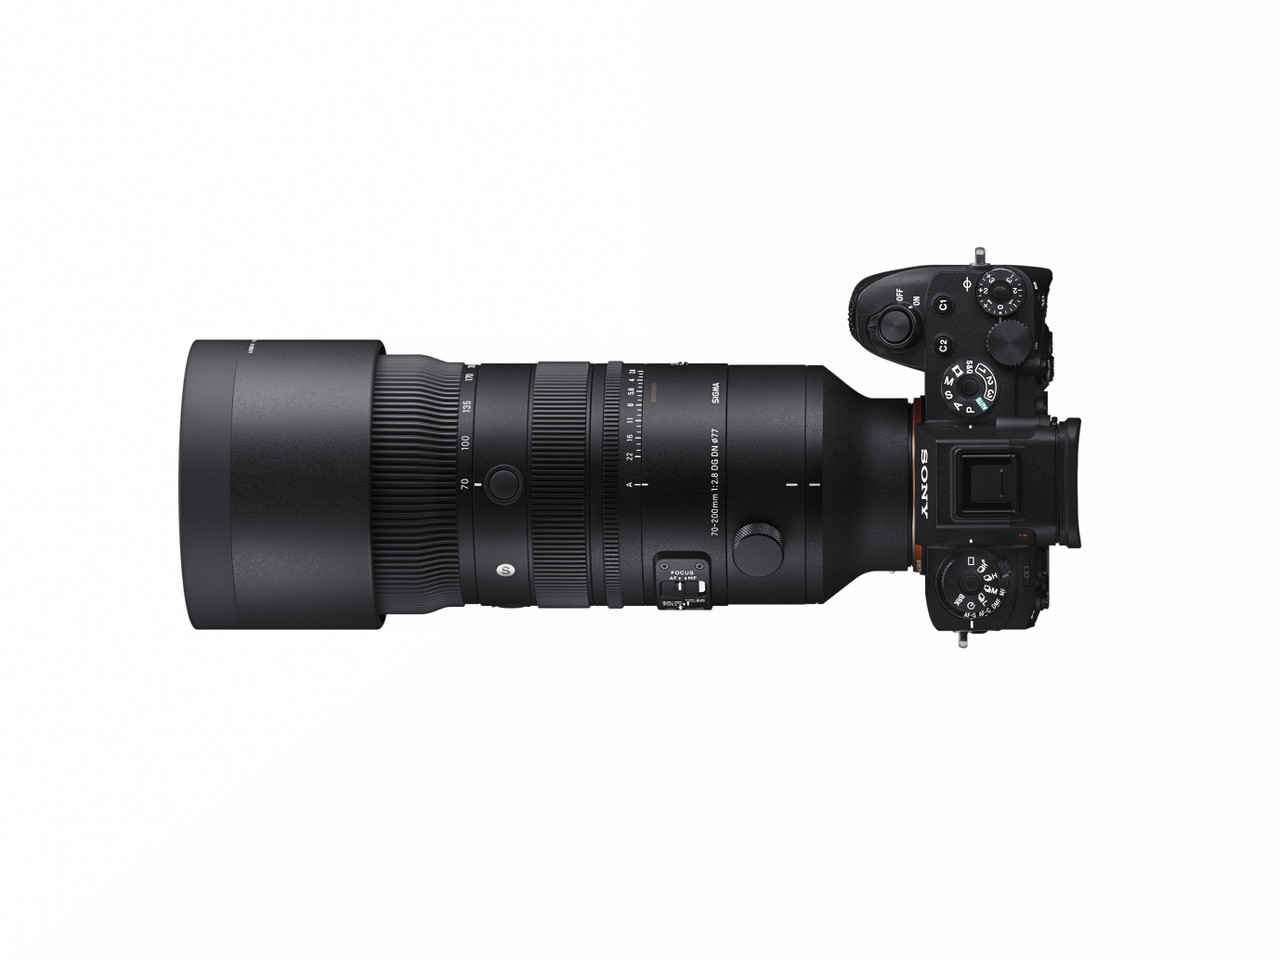 Sigma 70-200mm f/2.8 DG DN OS Sports Lens for Sony E (85126591656)